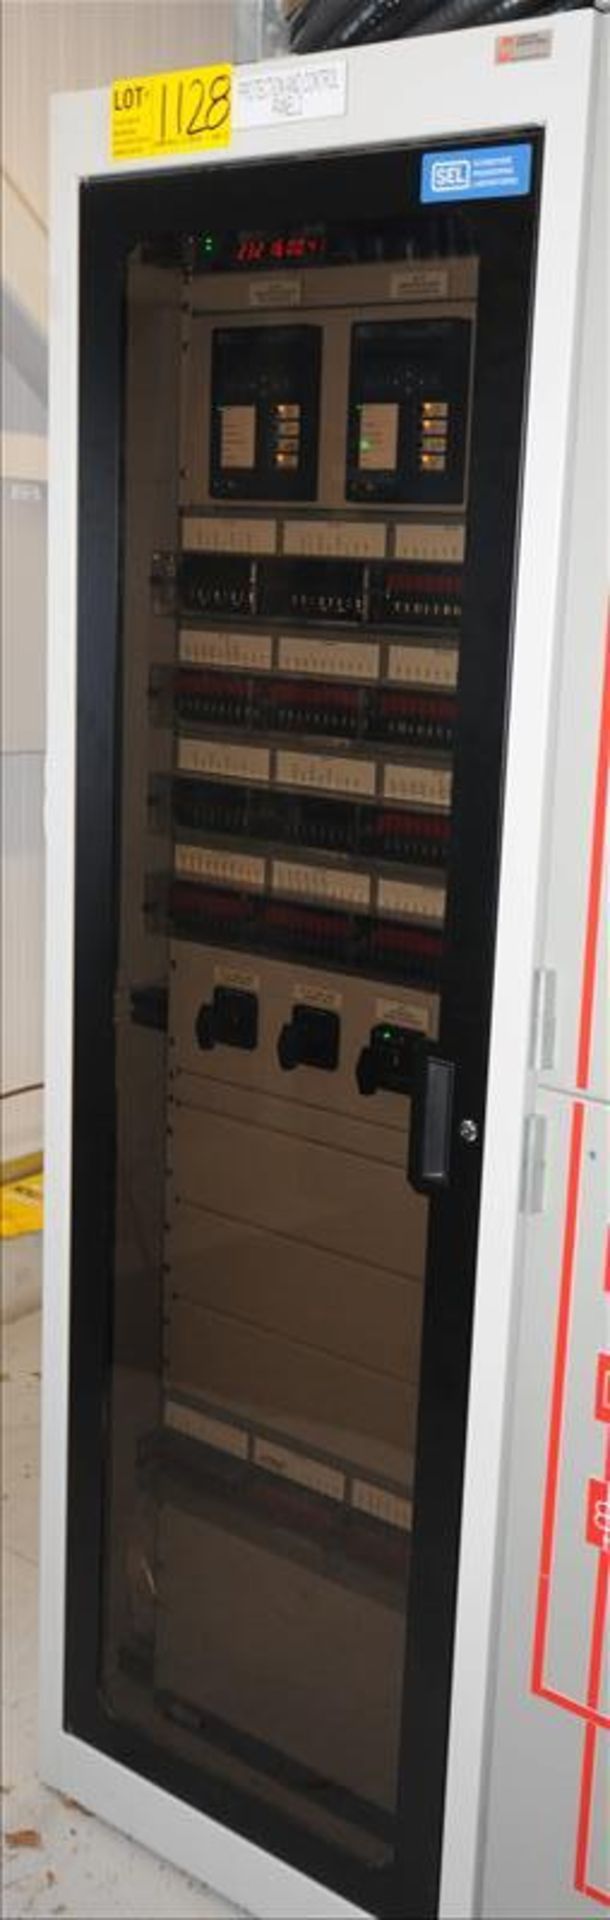 (2) SEL Protection and Control panels, system include SEL 700GI and SEL TS4-700GT intertie generator